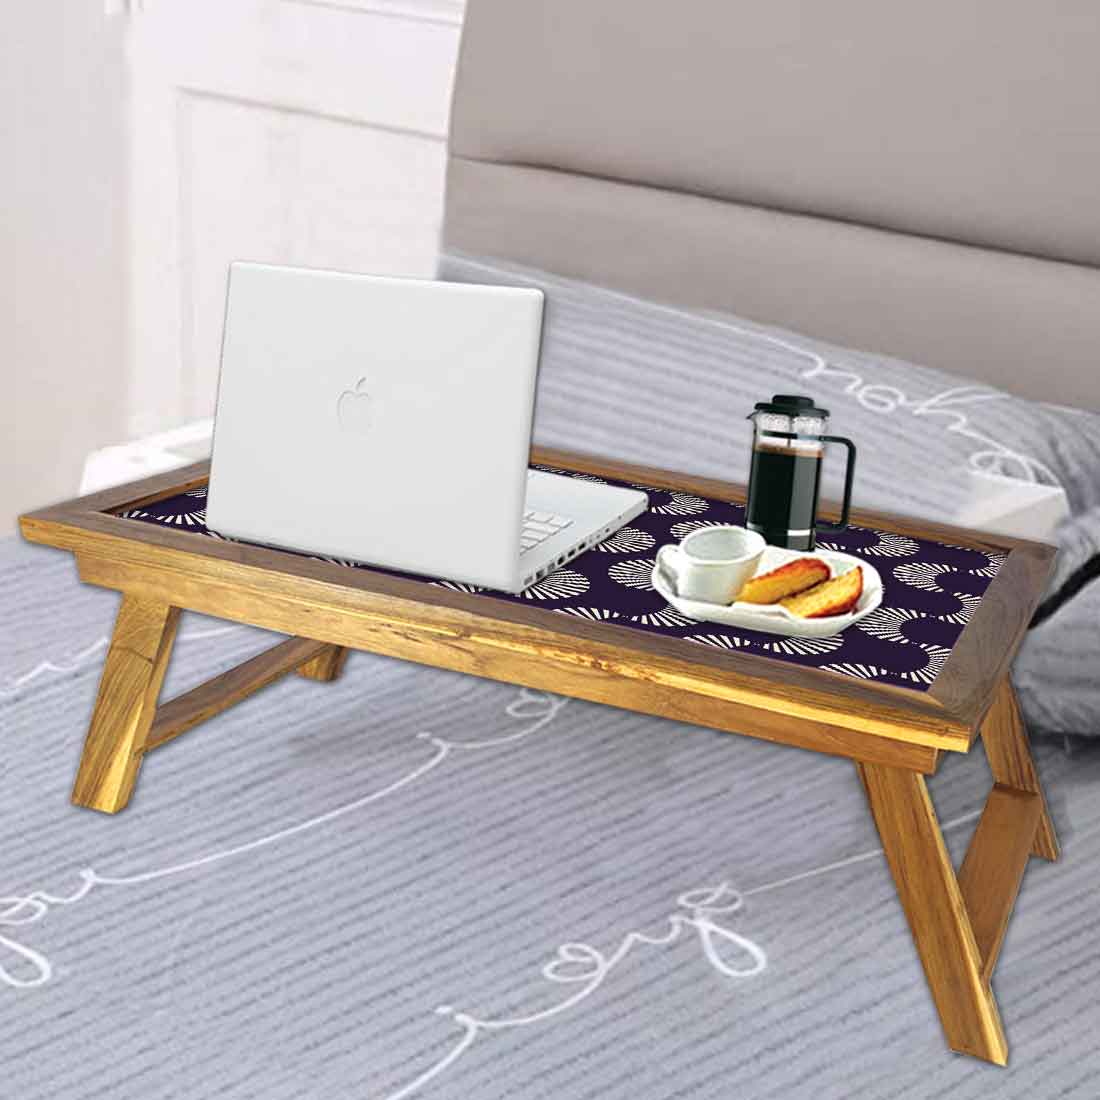 Modern Wooden Laptop Table for Home Bed Lapdesk Breakfast Table - Retro Nutcase